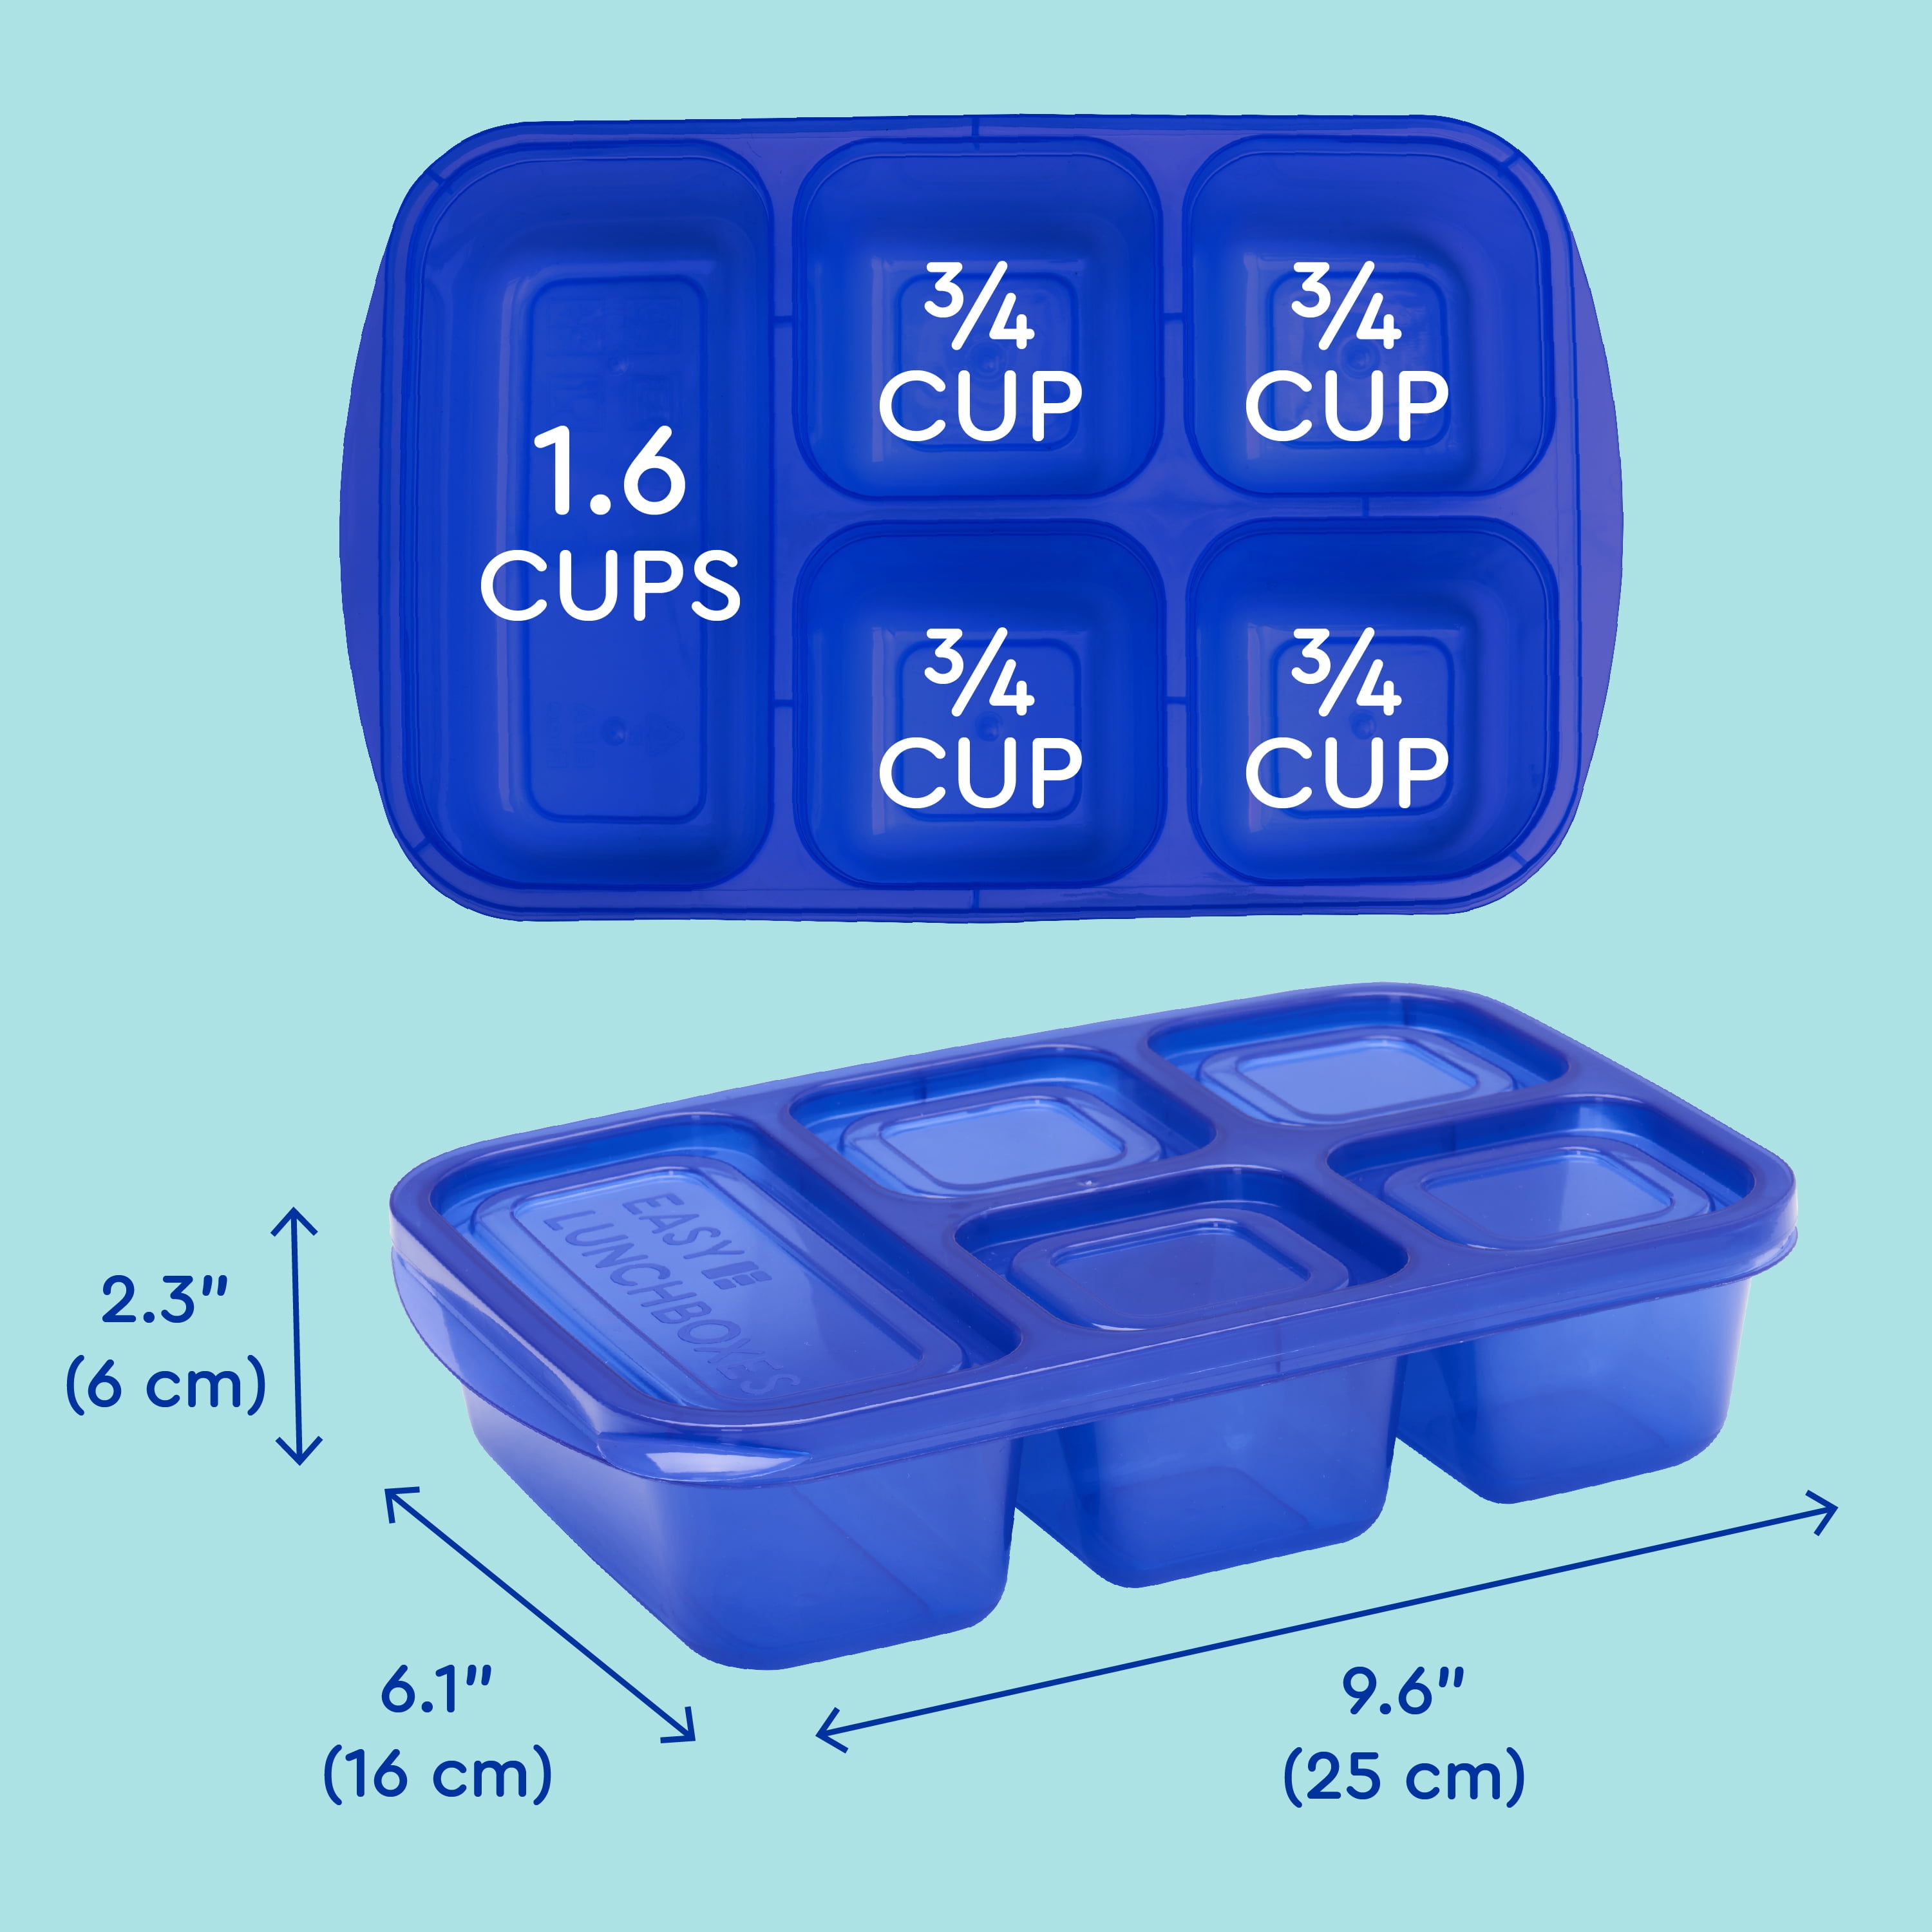 Lunbxx Bento Lunch Boxes - Reusable 5-Compartment Food Lunchables  Containers, Snack Boxes For Adults Container for School, Work, and Travel,  Set of 4